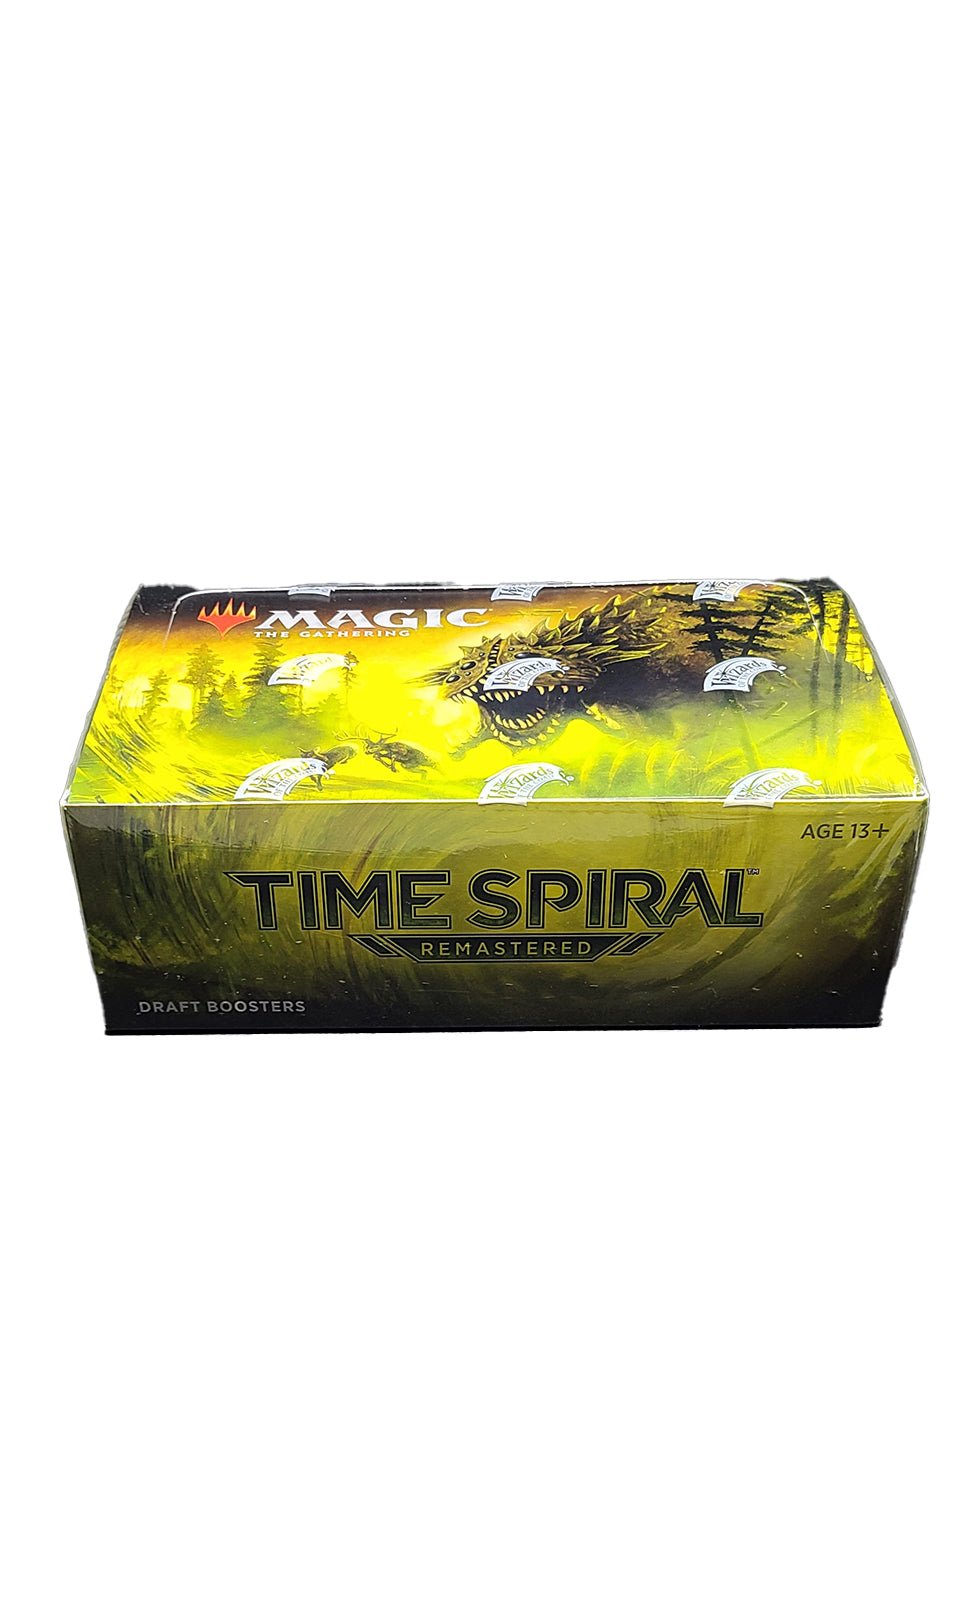 2021 Magic the Gathering Time Spiral Remastered Box Magic the Gathering Sealed Box - Hobby Gems